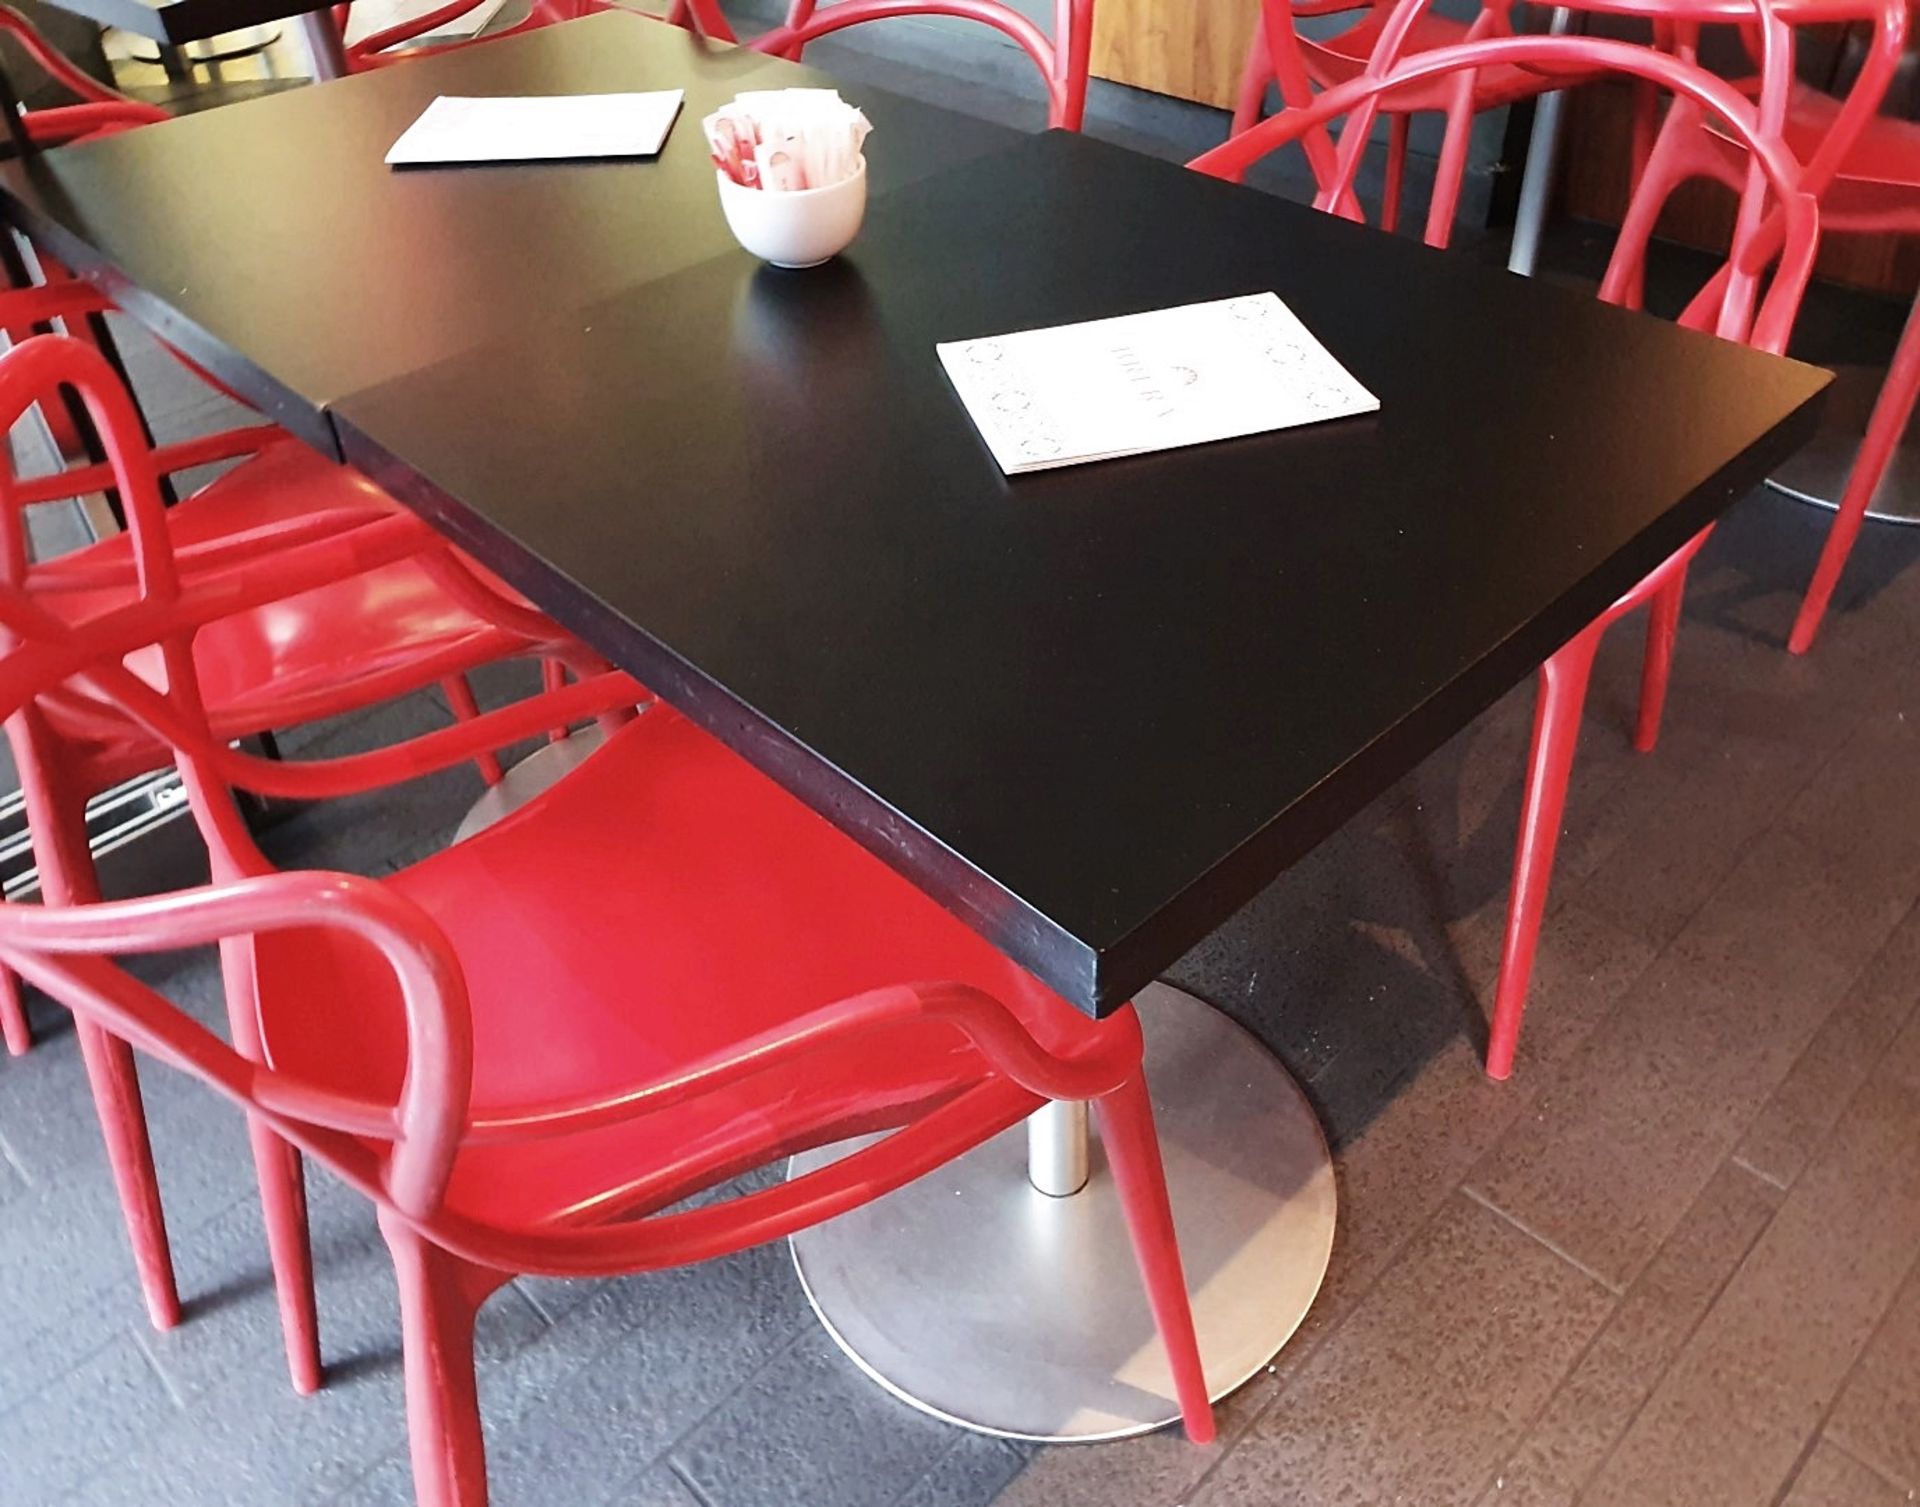 2 x Square Black Indoor Cafe Tables with Chrome Bases - Dimensions Of Each: 60 x 60 x Height 74cm - Image 2 of 2